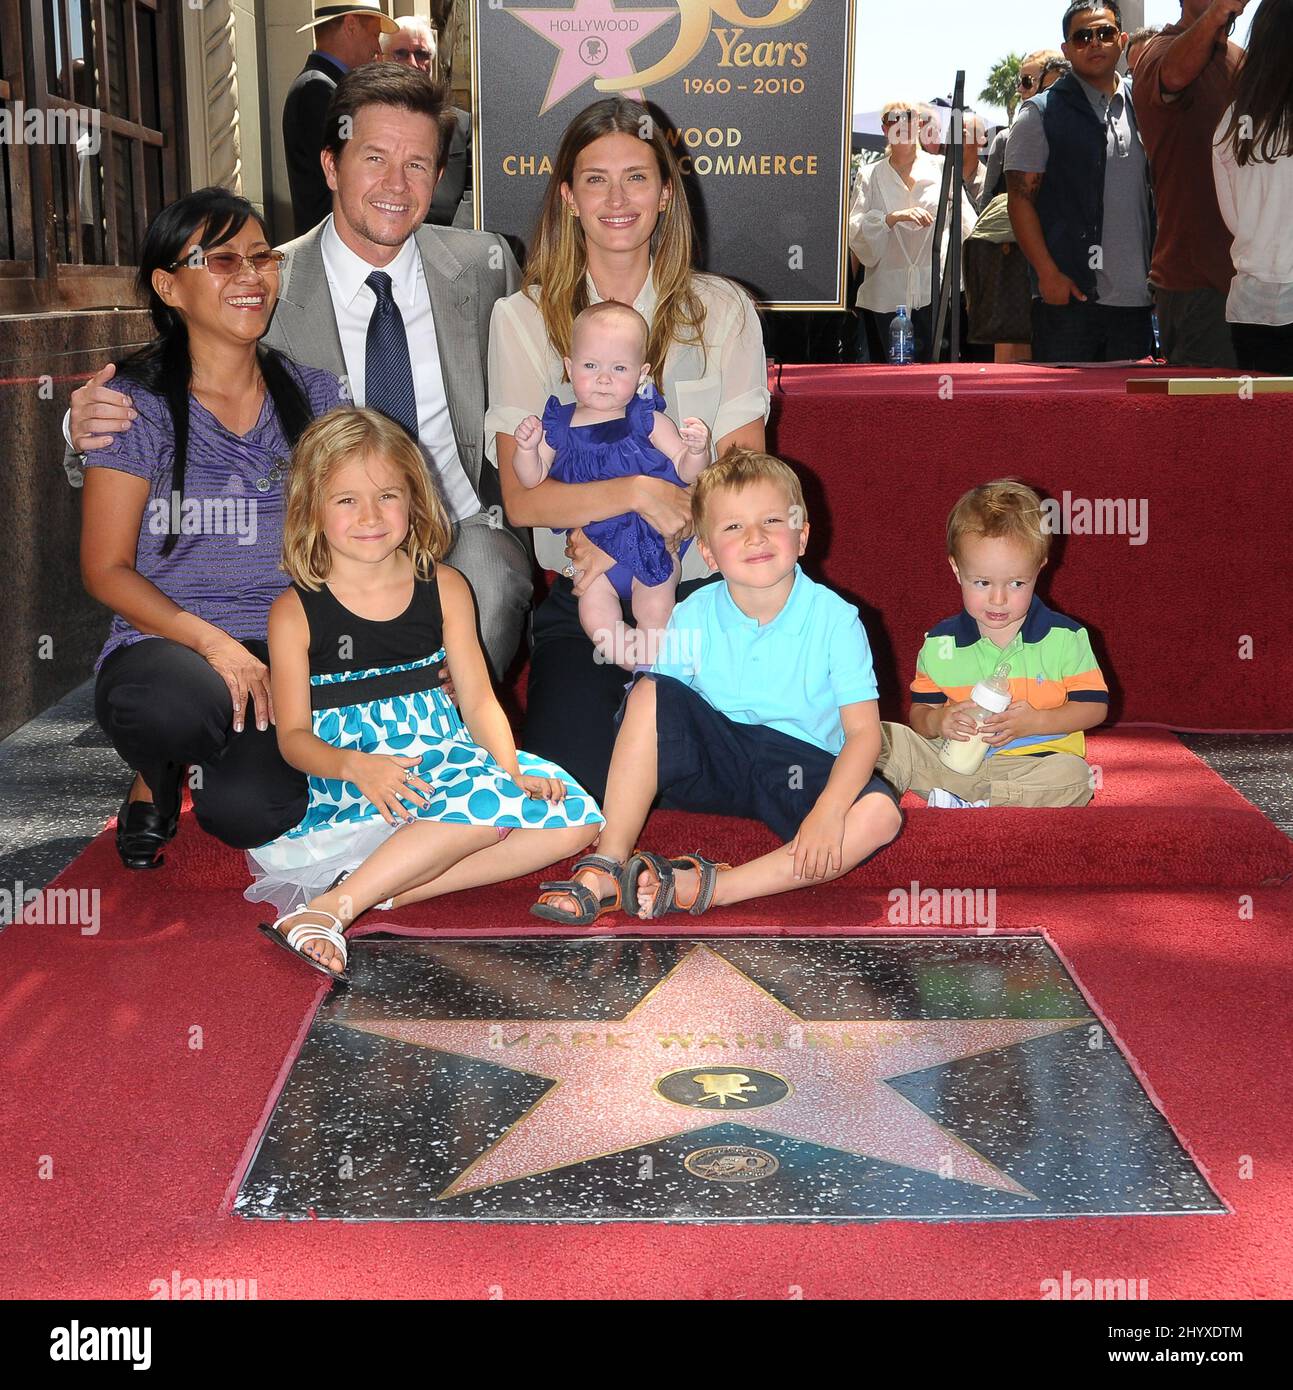 Mark Wahlberg, Rhea Durham, daughters Ella Rae and Margaret Grace, sons Michael and Brendan Joseph with the family nannie Cassie attend as Mark Wahlberg is honored with a star on the Hollywood Walk of Fame, Hollywood, CA. Stock Photo